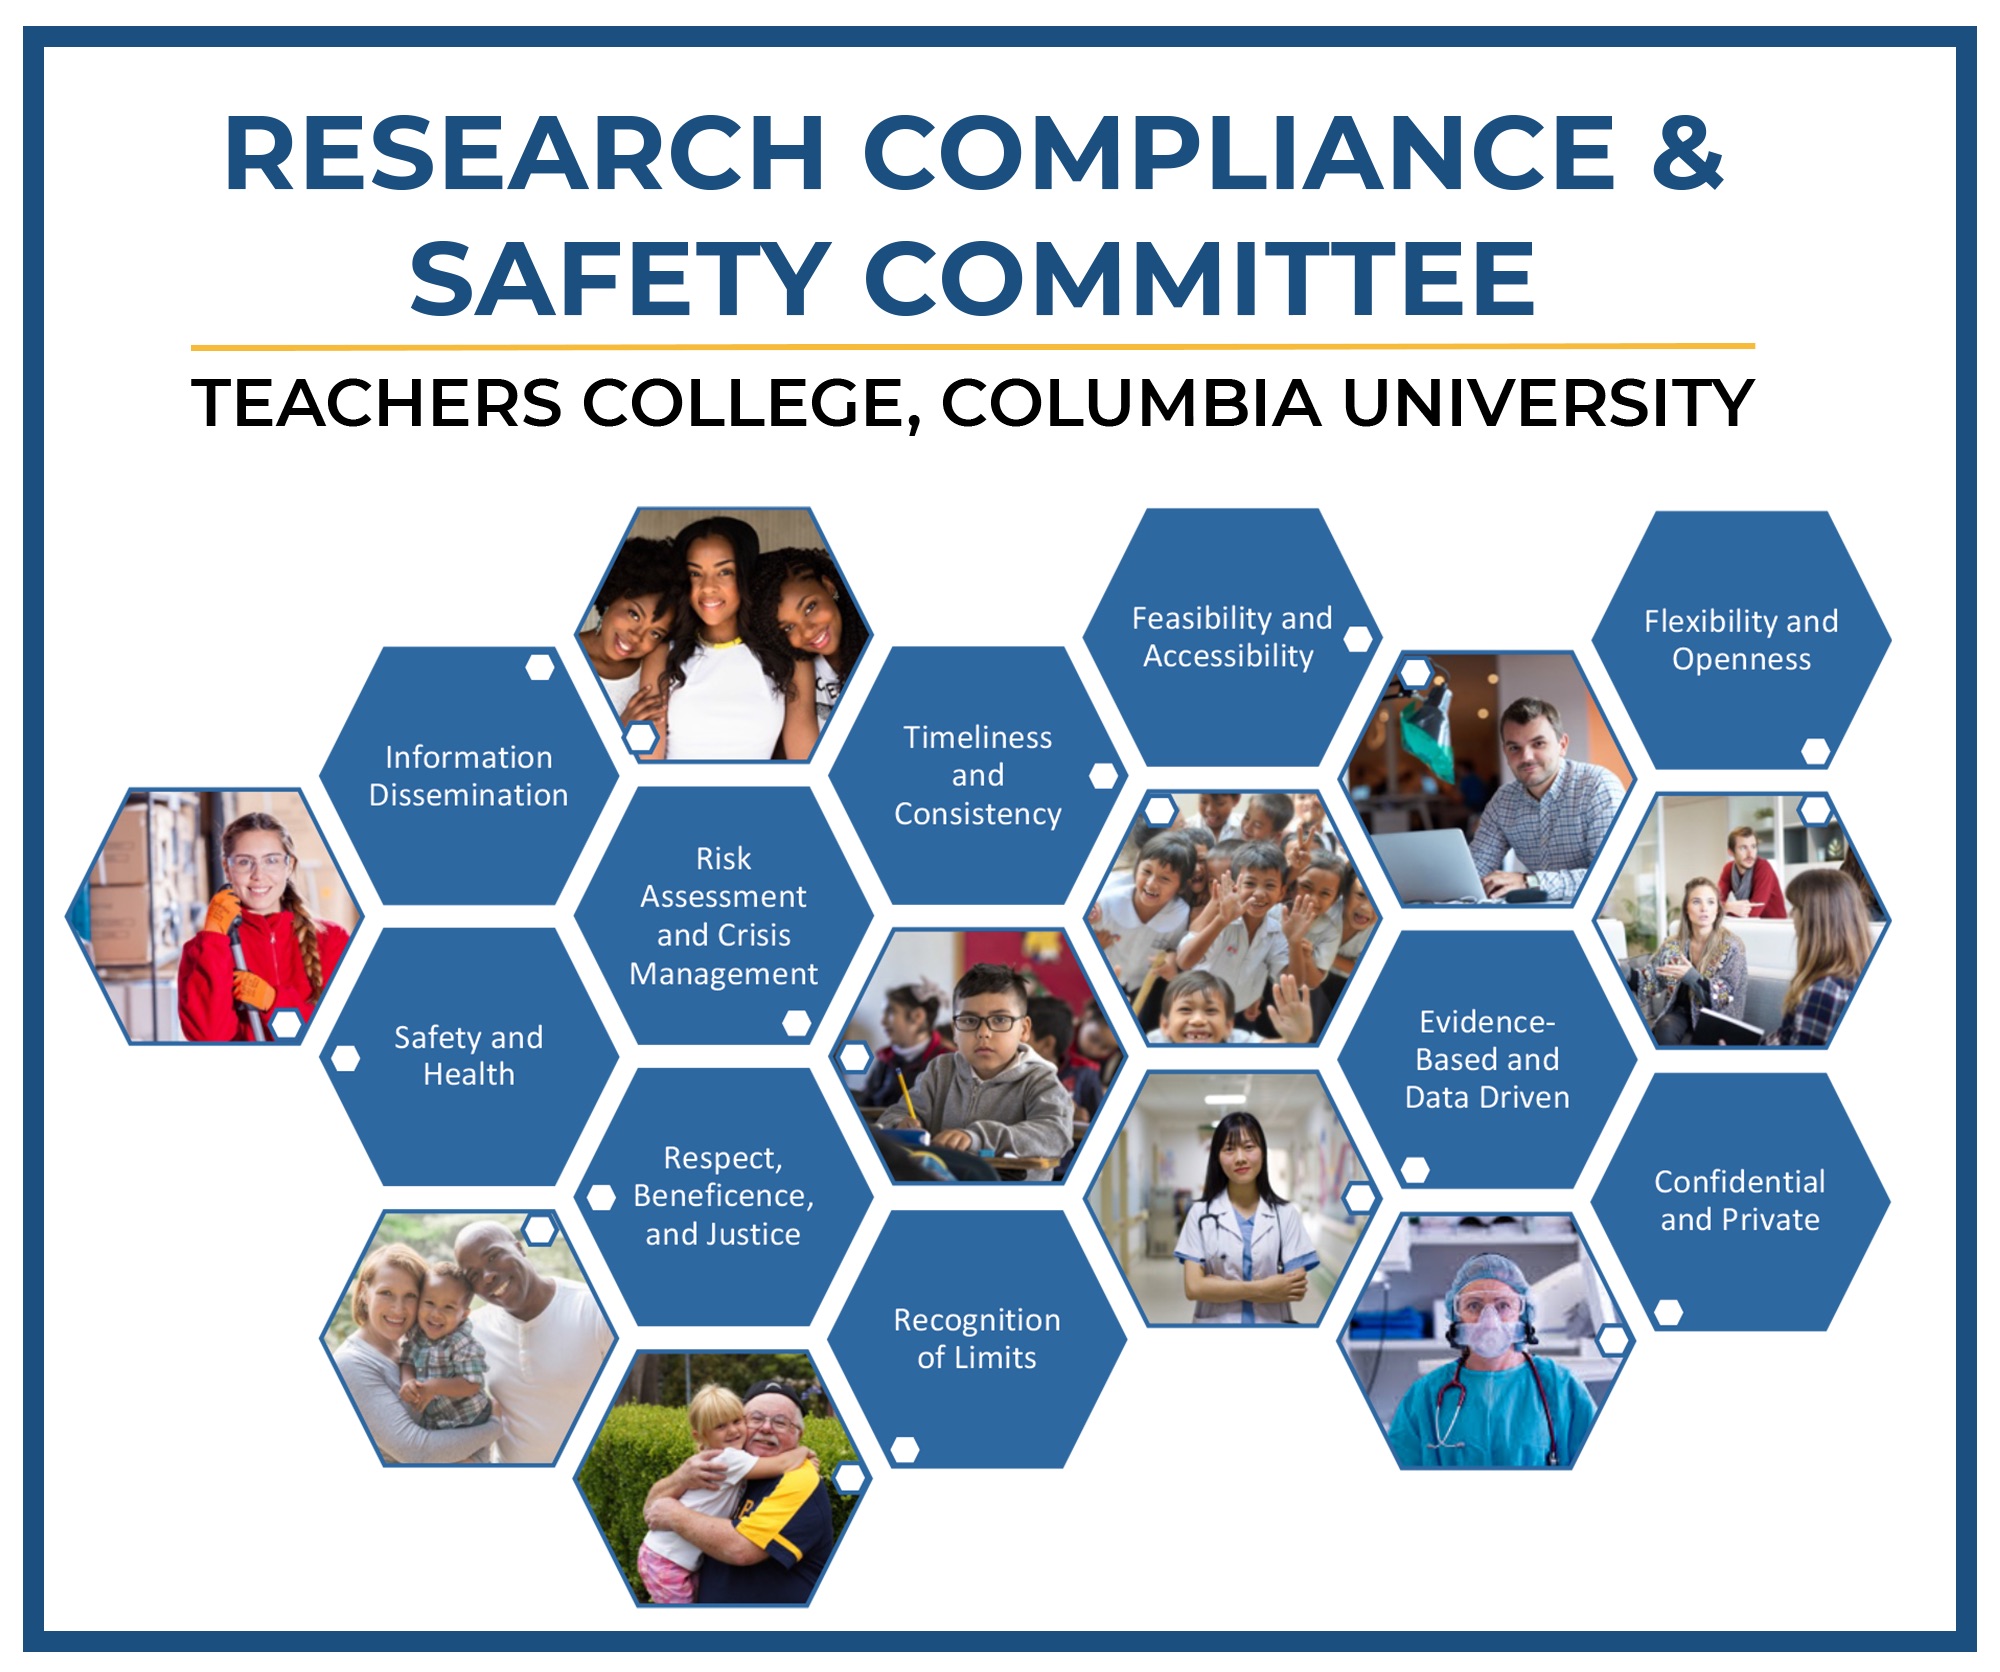 Research Compliance and Safety Committee